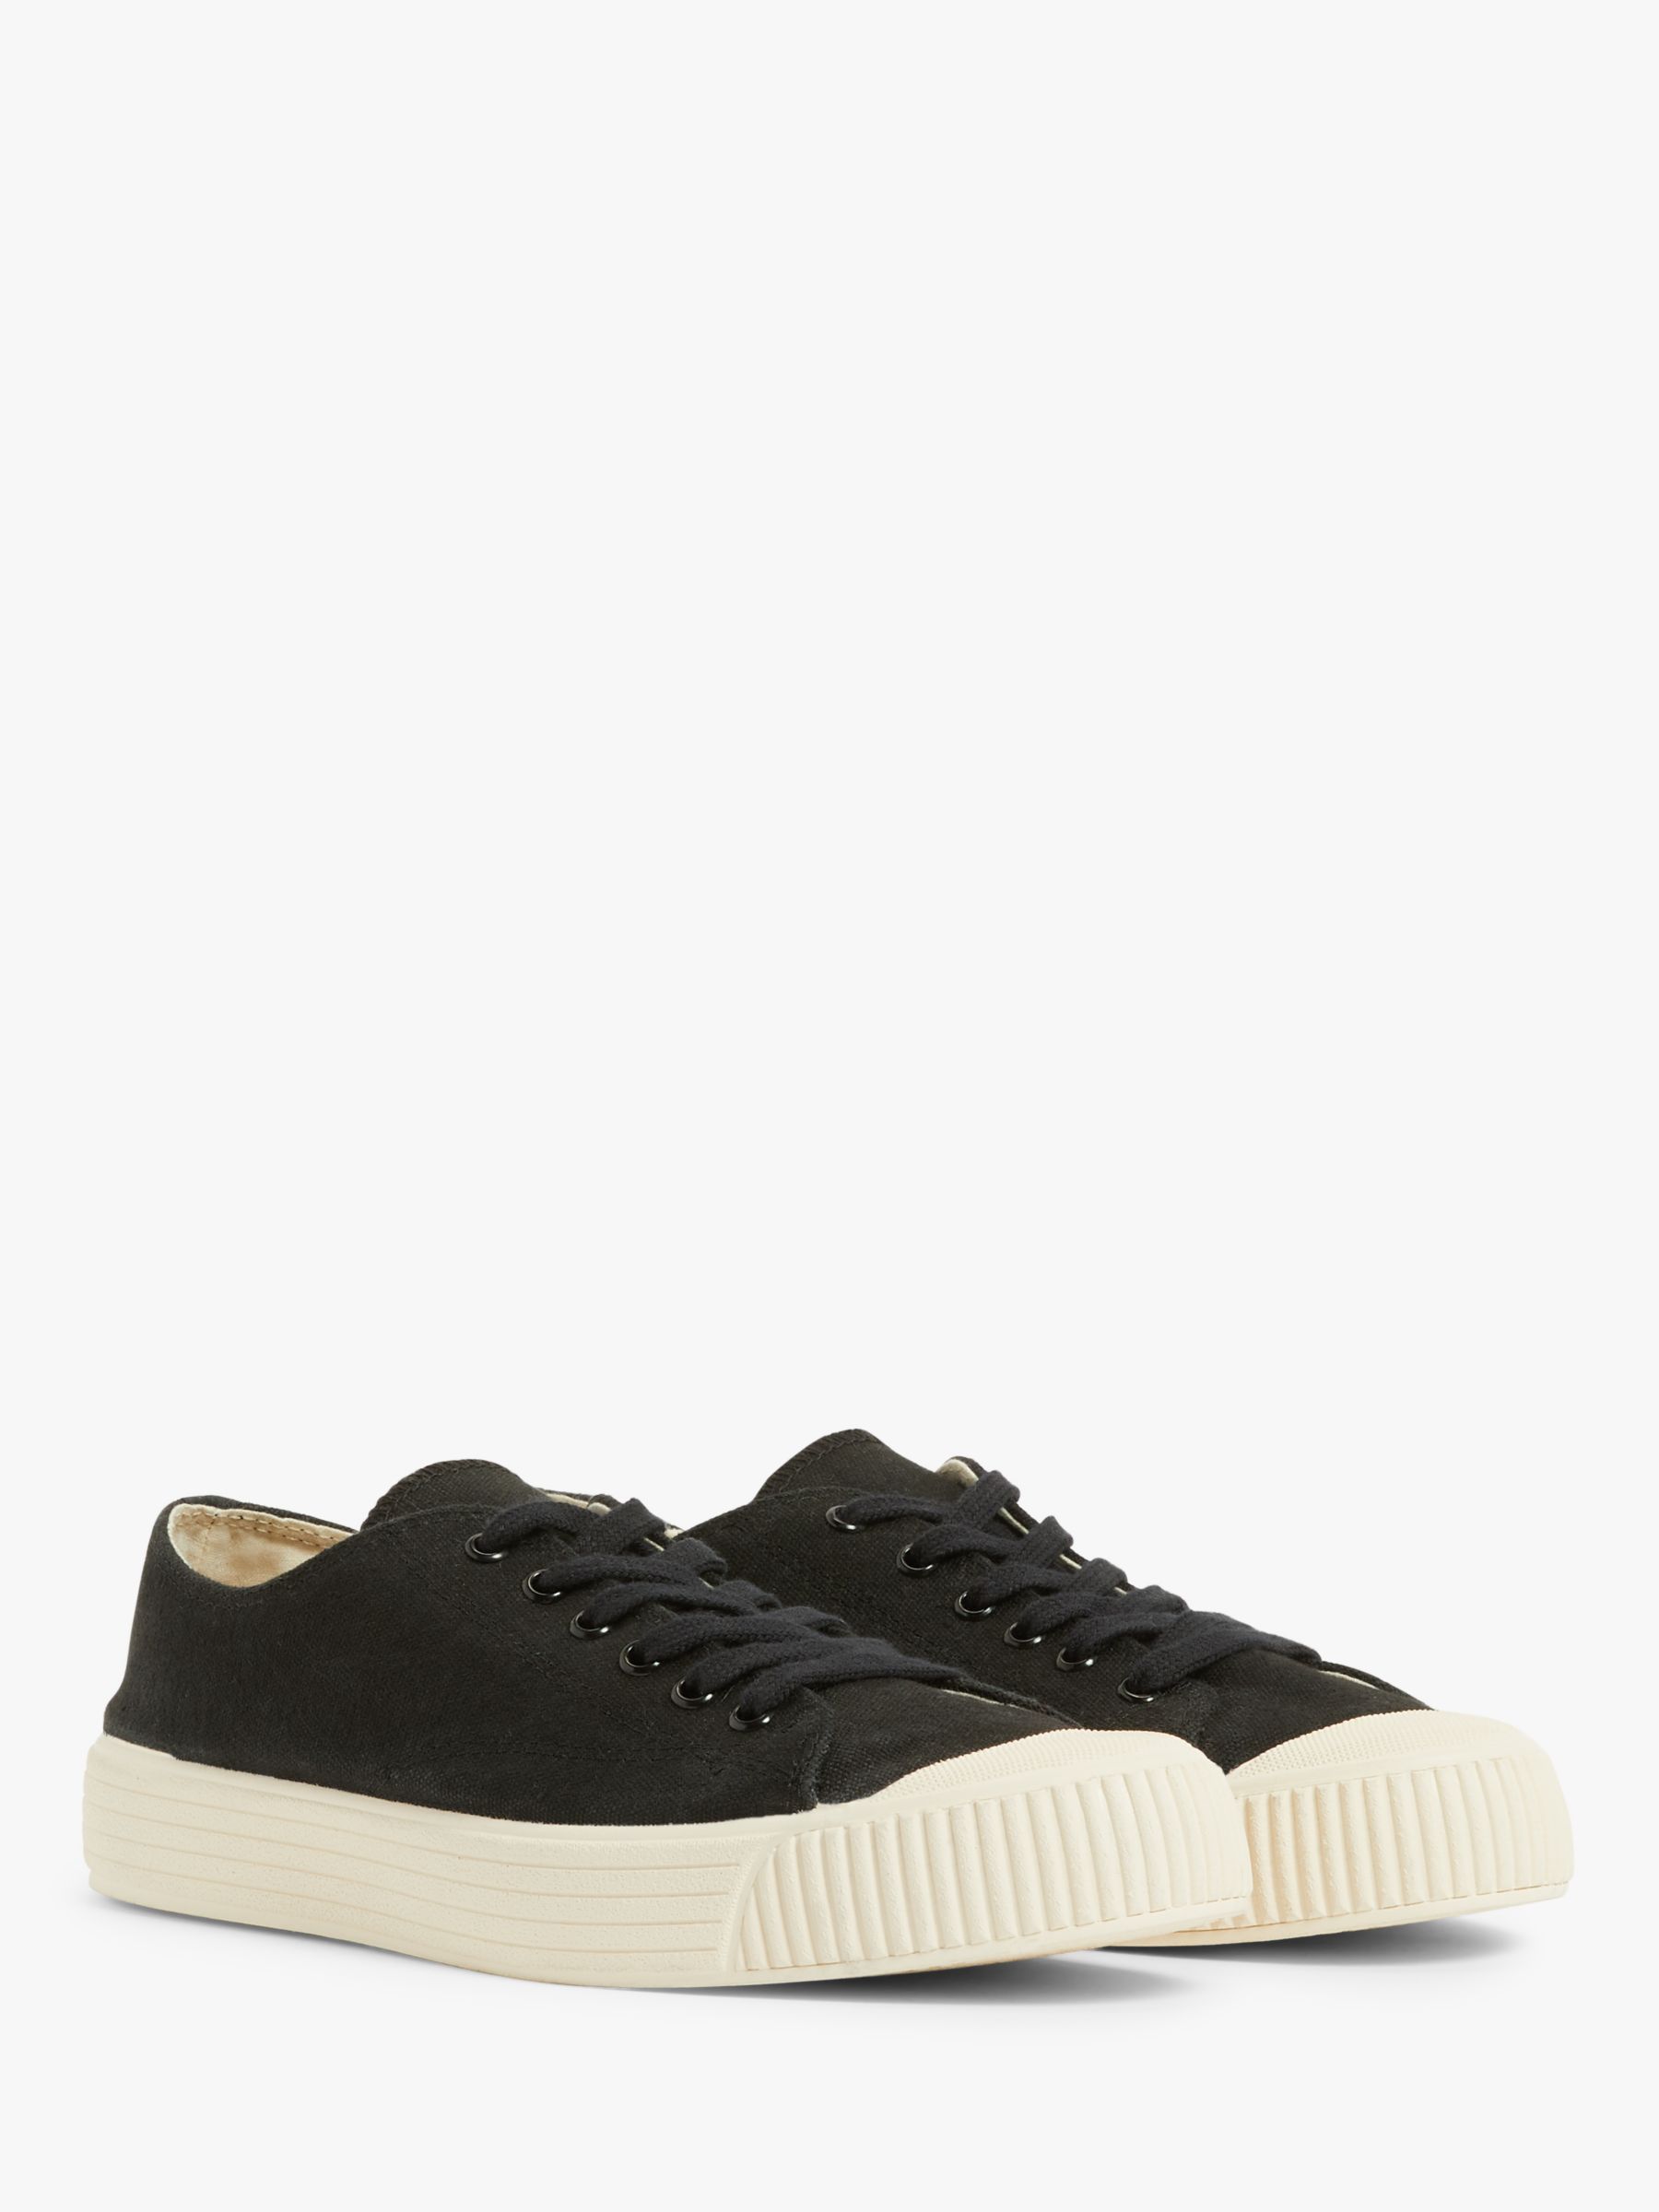 John Lewis & Partners Canvas Trainers, Washed Black at John Lewis ...